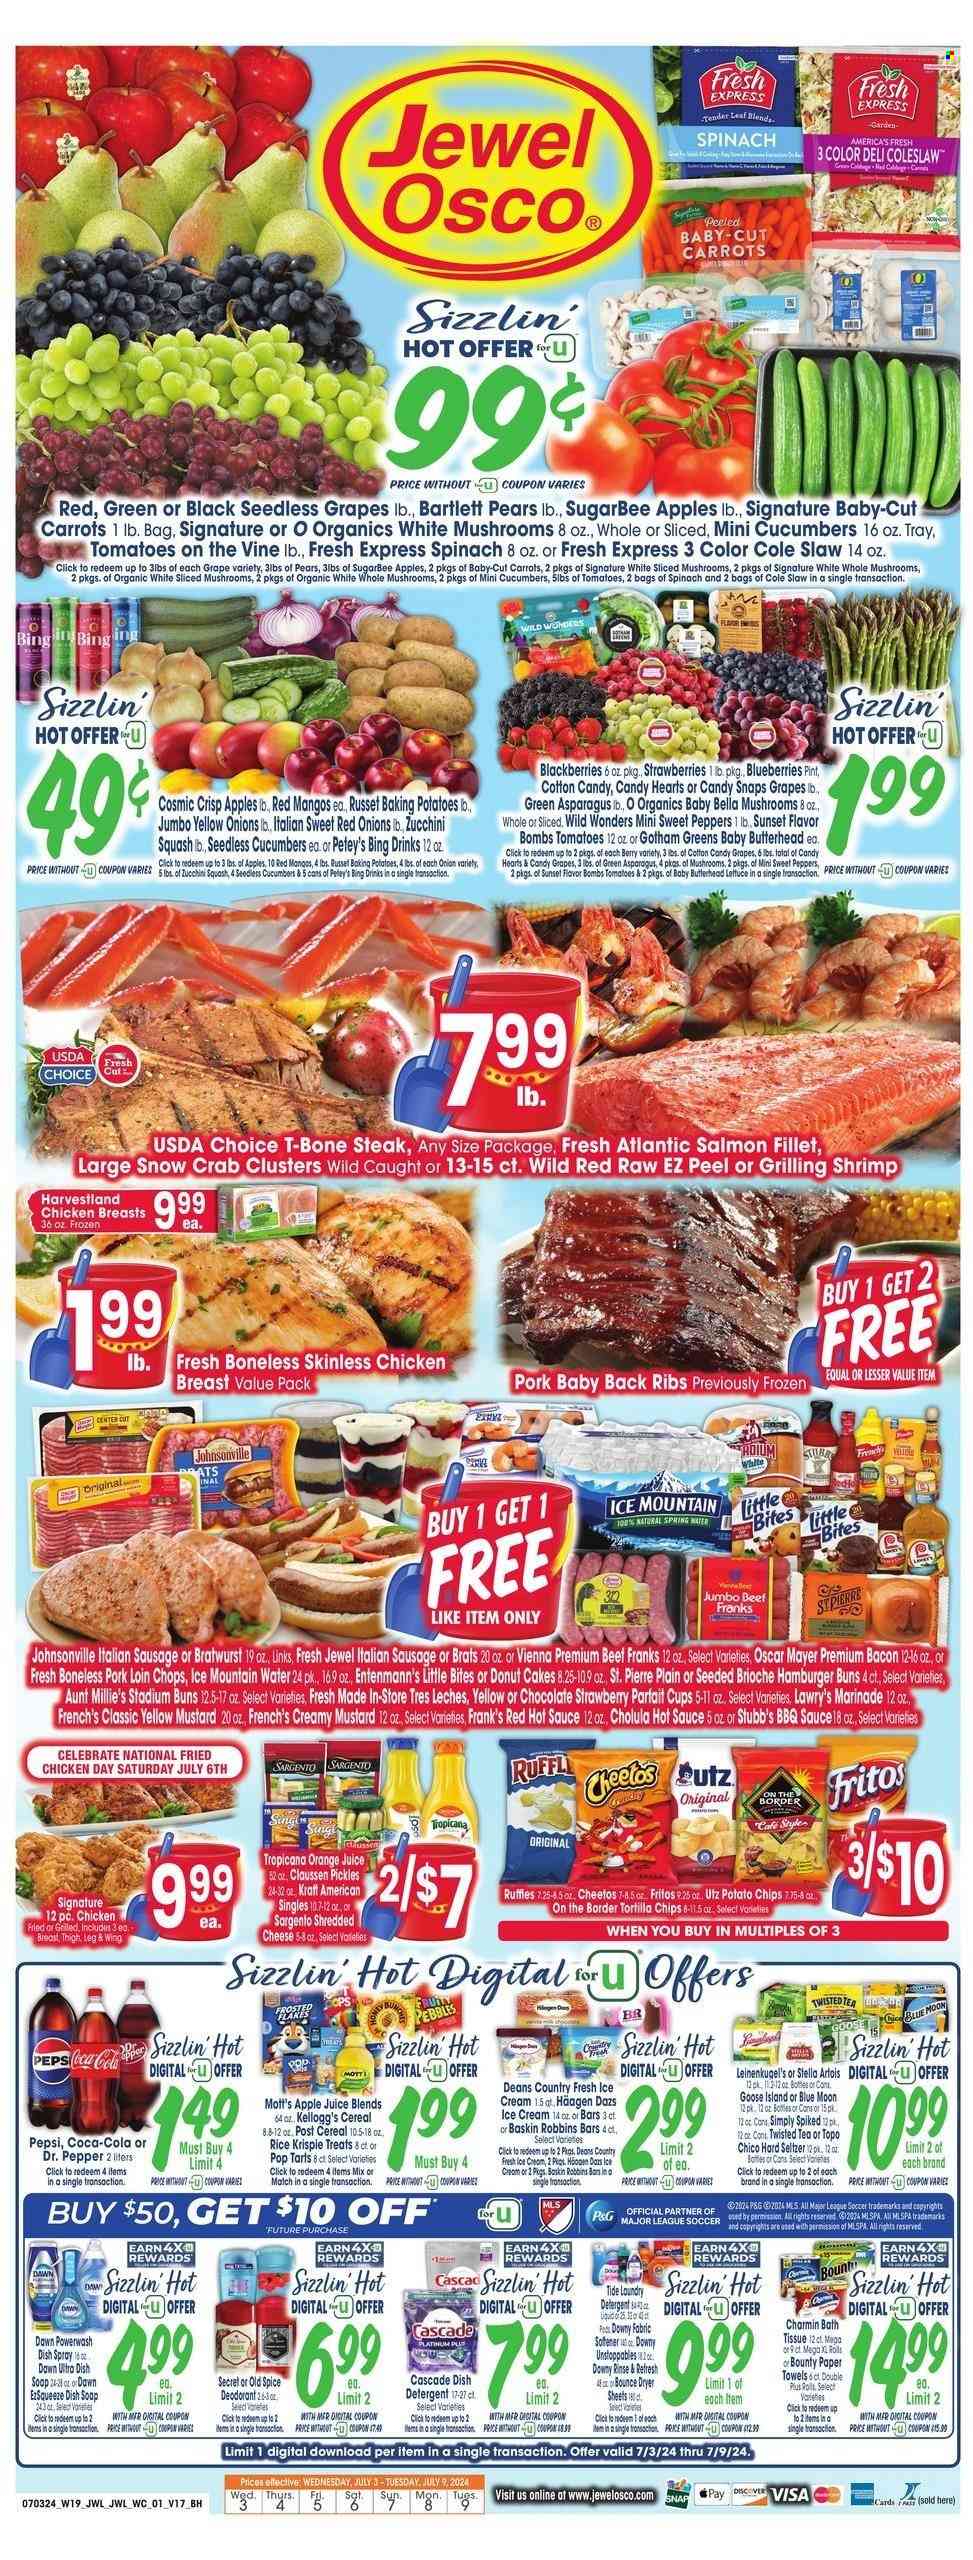 thumbnail - Jewel Osco Flyer - 07/03/2024 - 07/09/2024 - Sales products - mushrooms, baby bella mushrooms, cake, muffin, burger buns, brioche, donut, Entenmann's, dessert, rice squares, asparagus, cabbage, carrots, coleslaw, red onions, russet potatoes, sweet peppers, zucchini, peppers, butterhead lettuce, Bartlett pears, blackberries, seedless grapes, strawberries, Mott's, fish fillets, salmon, salmon fillet, seafood, crab, shrimps, crab clusters, fried chicken, Kraft®, ready meal, chicken breasts, Johnsonville, Oscar Mayer, bratwurst, italian sausage, frankfurters, shredded cheese, sliced cheese, cheese, Kraft Singles, Sargento, ice cream, Häagen-Dazs, Bounty, Kellogg's, Pop-Tarts, Little Bites, Fritos, tortilla chips, potato chips, Cheetos, Ruffles, salty snack, pickles, pickled vegetables, cereals, crispy rice bar, BBQ sauce, mustard, hot sauce, marinade, sauce, apple juice, Coca-Cola, lemonade, Pepsi, orange juice, juice, ice tea, Dr. Pepper, soft drink, spring water, Ice Mountain, water, carbonated soft drink, Hard Seltzer, Stella Artois, Topo Chico, beef meat, beef steak, t-bone steak, steak, ribs, pork chops, pork loin, pork meat, pork ribs, pork back ribs, bath tissue, kitchen towels, paper towels, Charmin, detergent, Cascade, Tide, fabric softener, laundry detergent, Bounce, dryer sheets, scent booster, Downy Laundry, dishwashing liquid, dishwasher tablets, Old Spice, deodorant, Leinenkugel's, Blue Moon, Twisted Tea. Page 1.